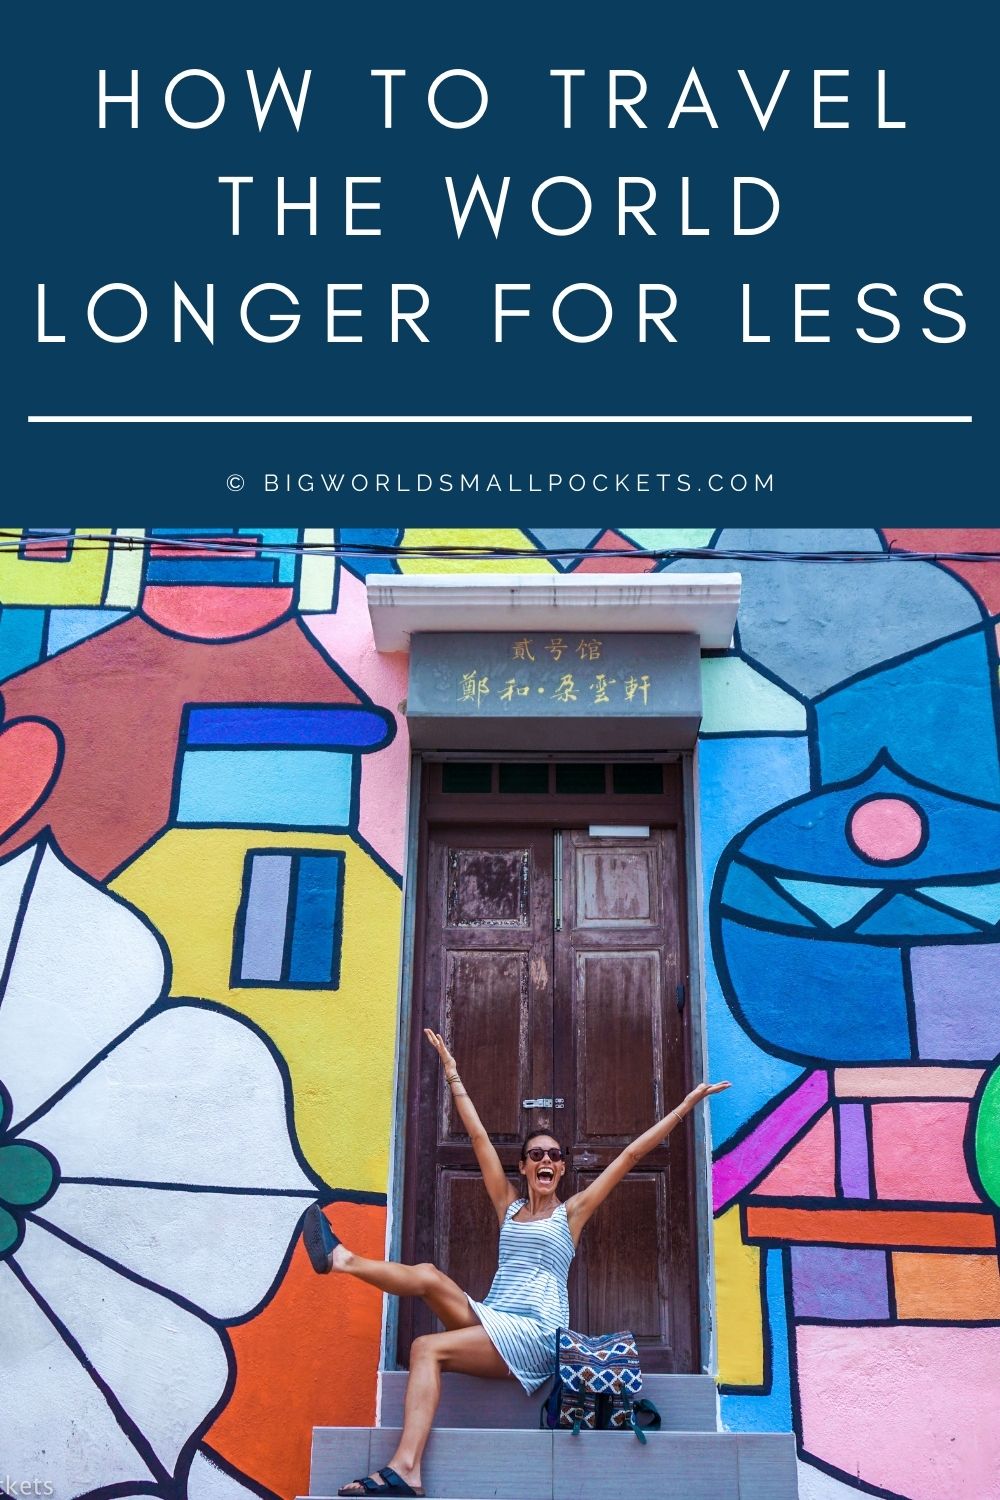 How to Travel the World Longer for Less